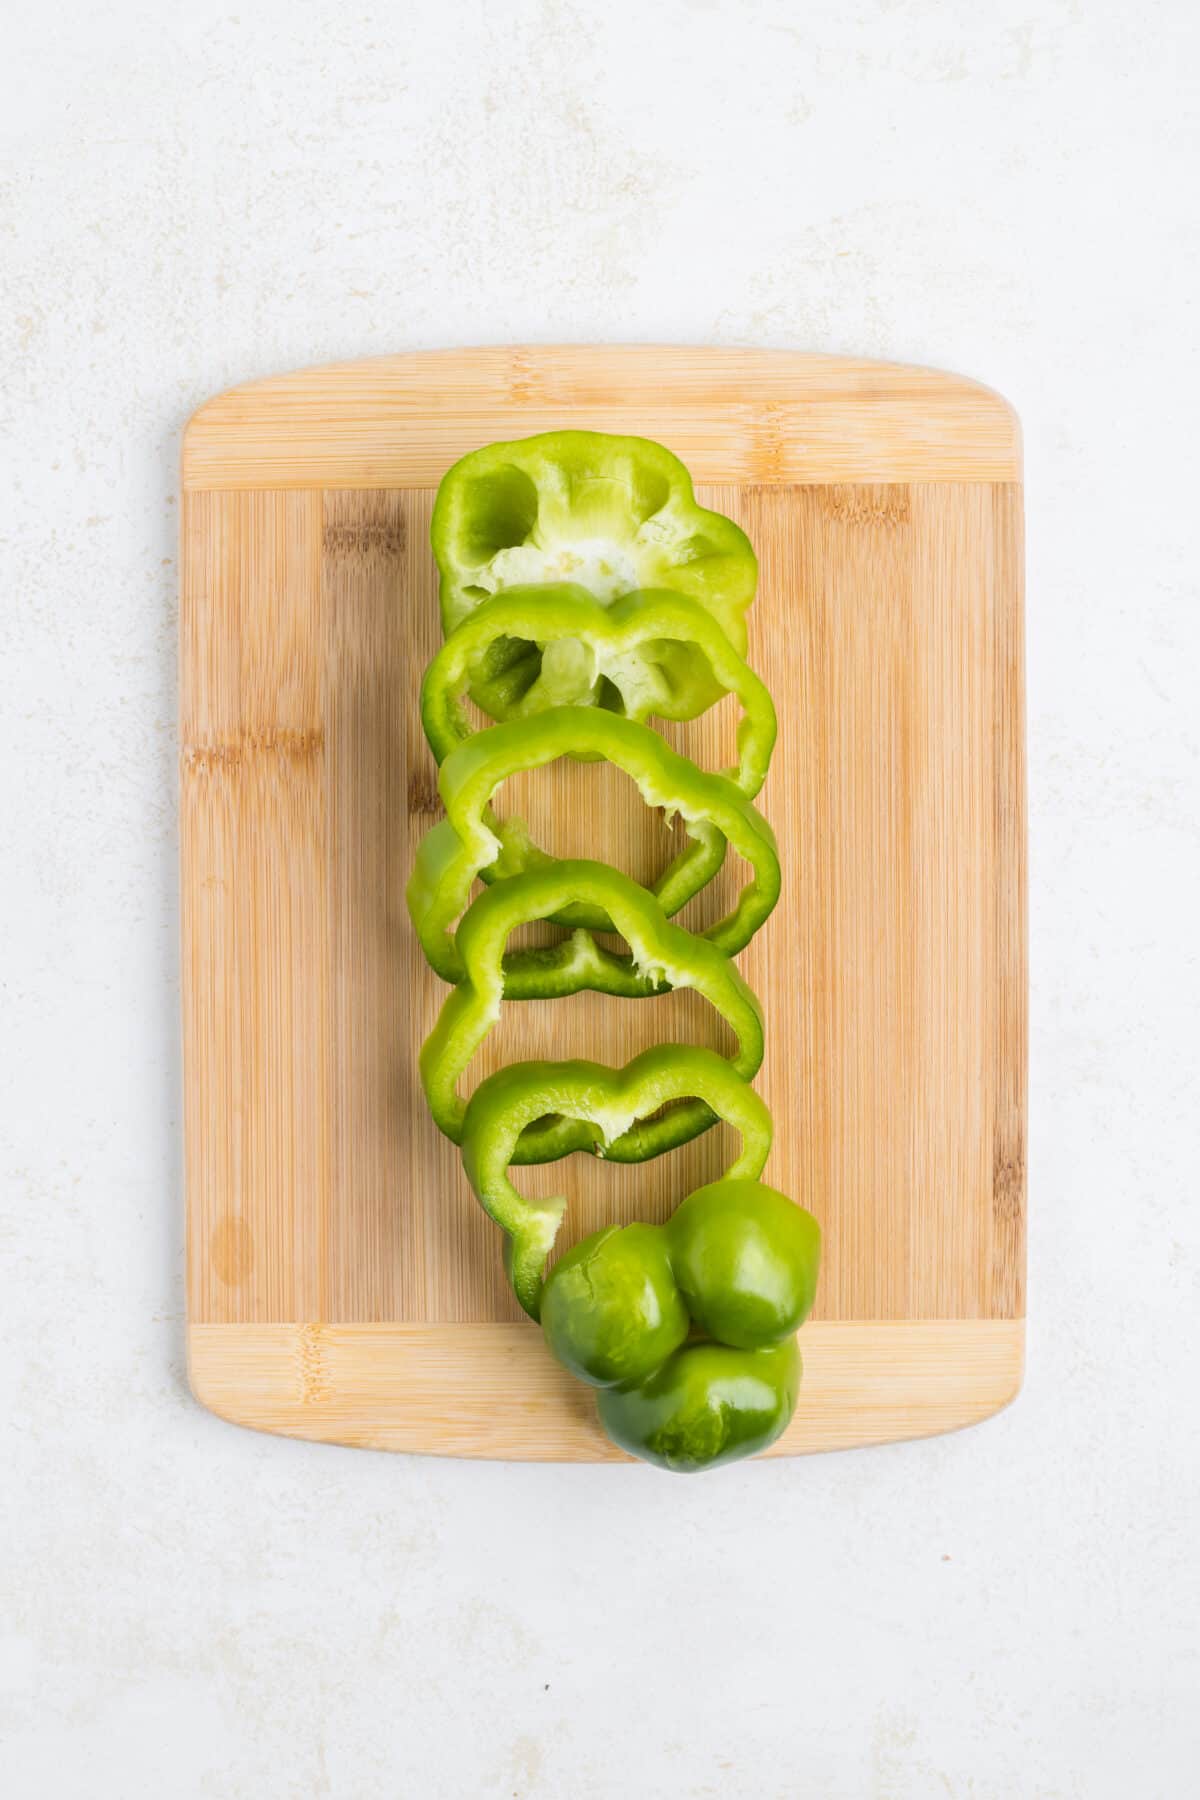 slicing the green bell peppers on a wooden cutting board.